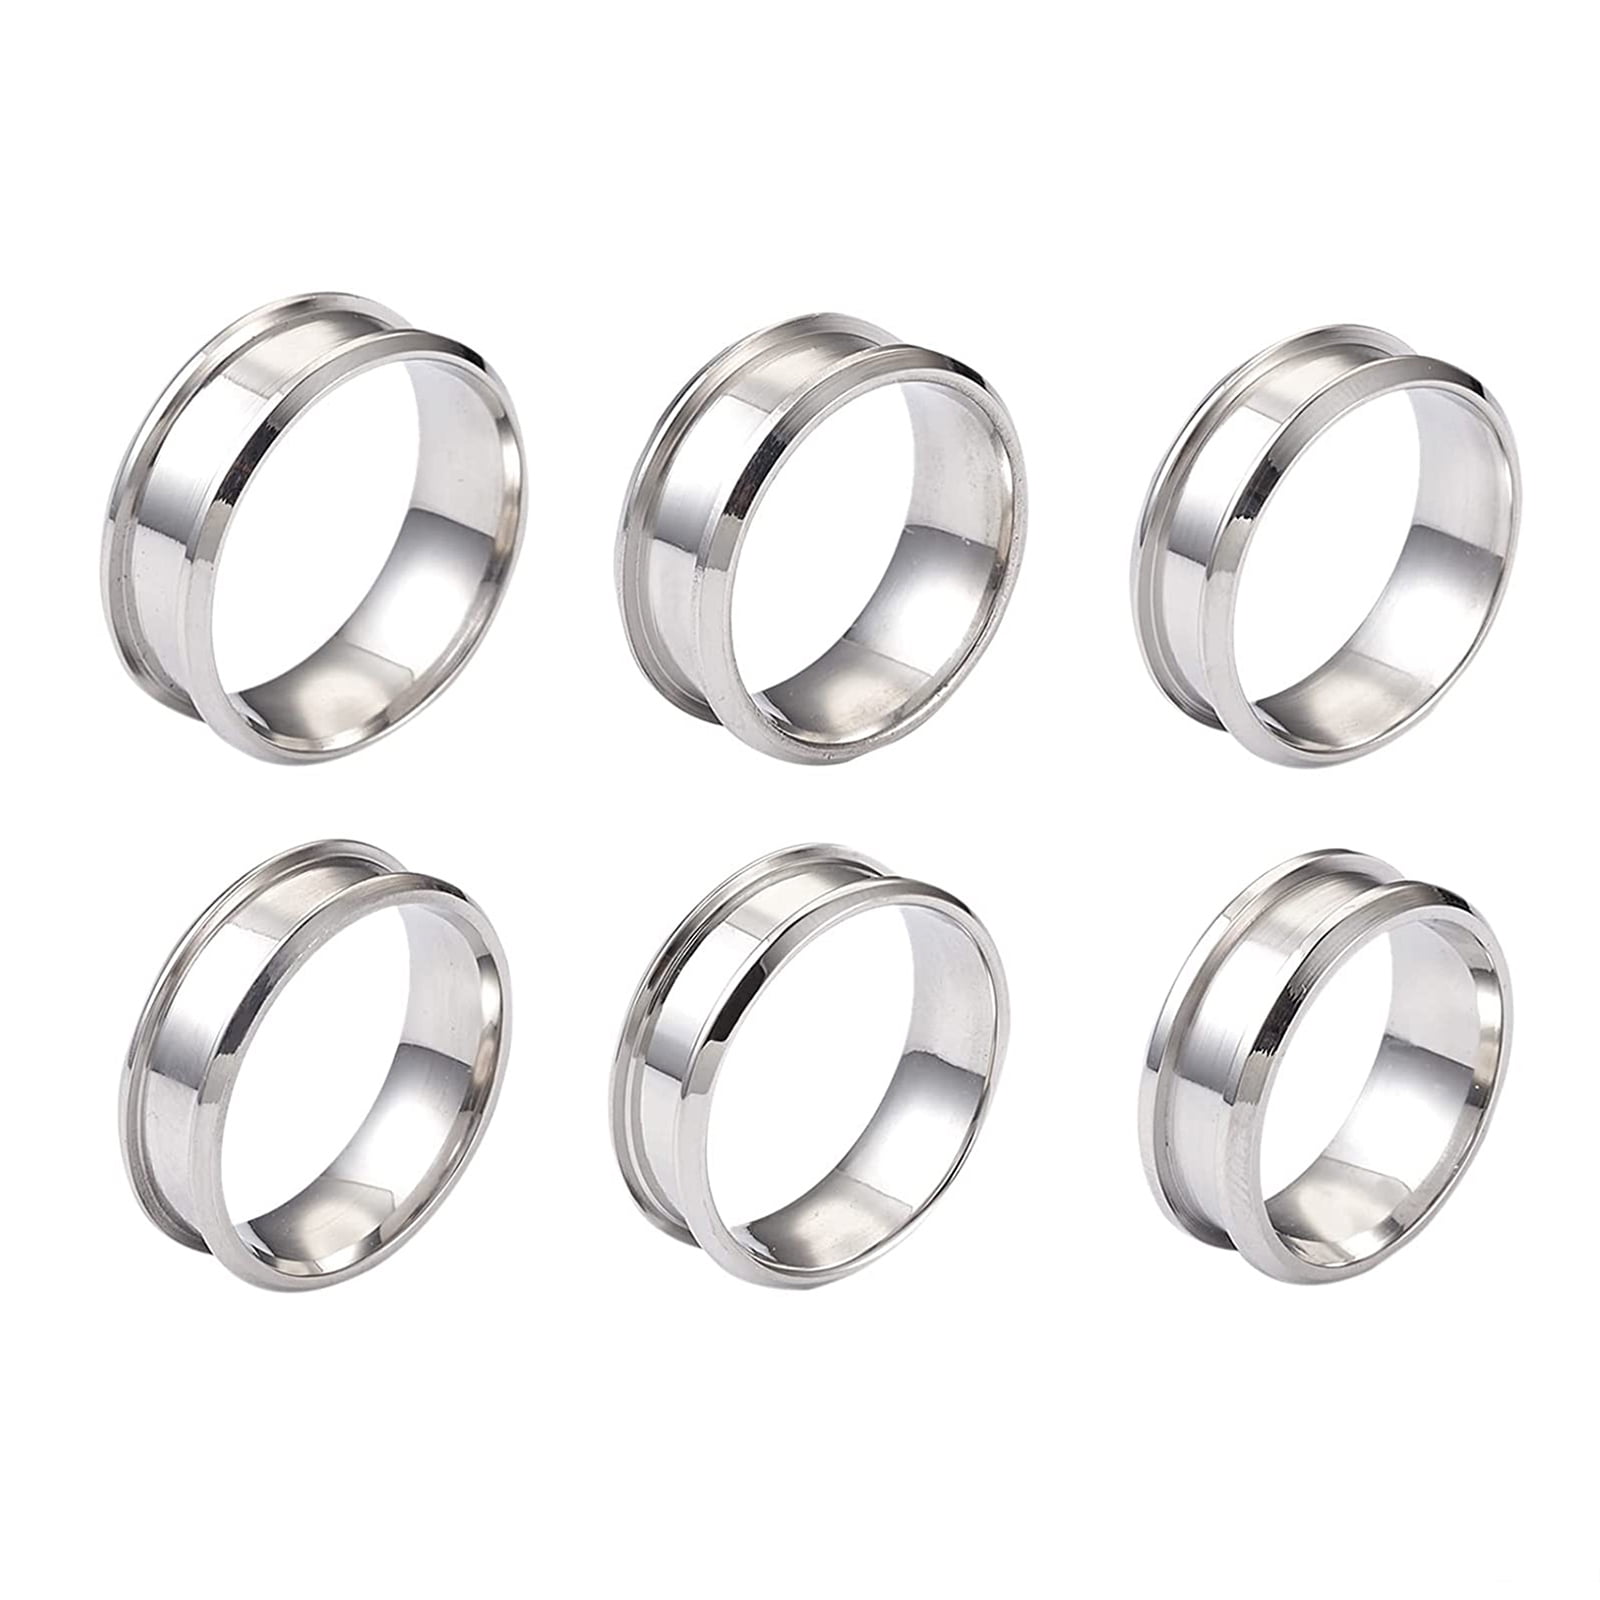 SDJMa Ring Size Adjuster for Loose Rings, Pack of 10 Clear Invisible  Jewelry Sizer, Spring Telephone Line Adjustment Ring Guard Resizer Make  Ring